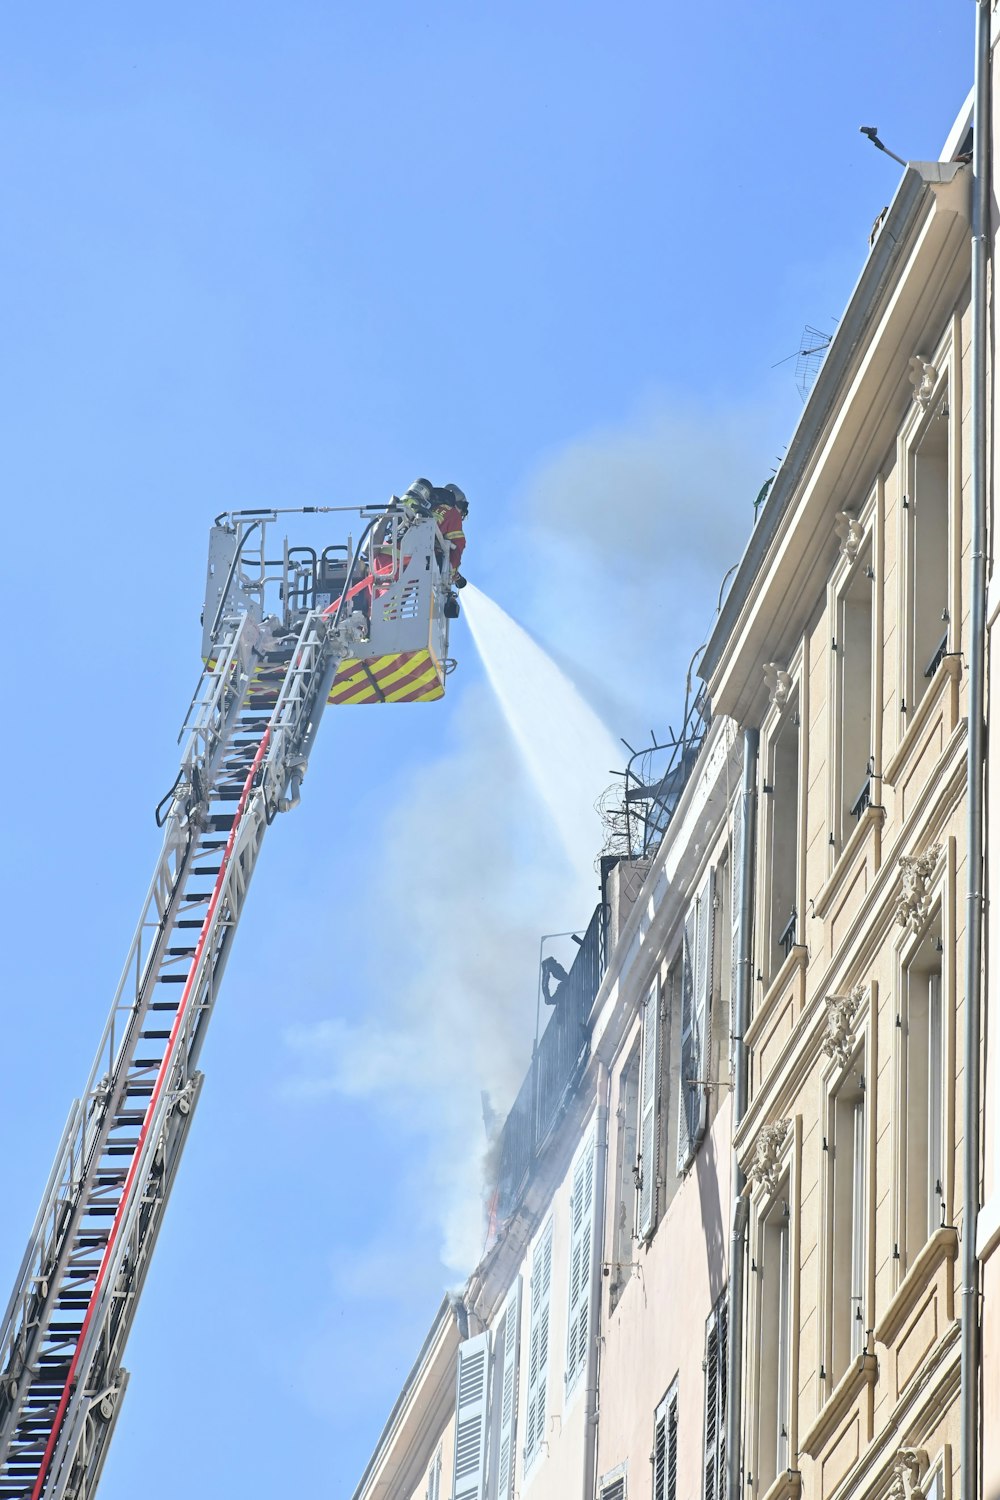 a fire truck spraying water on a building